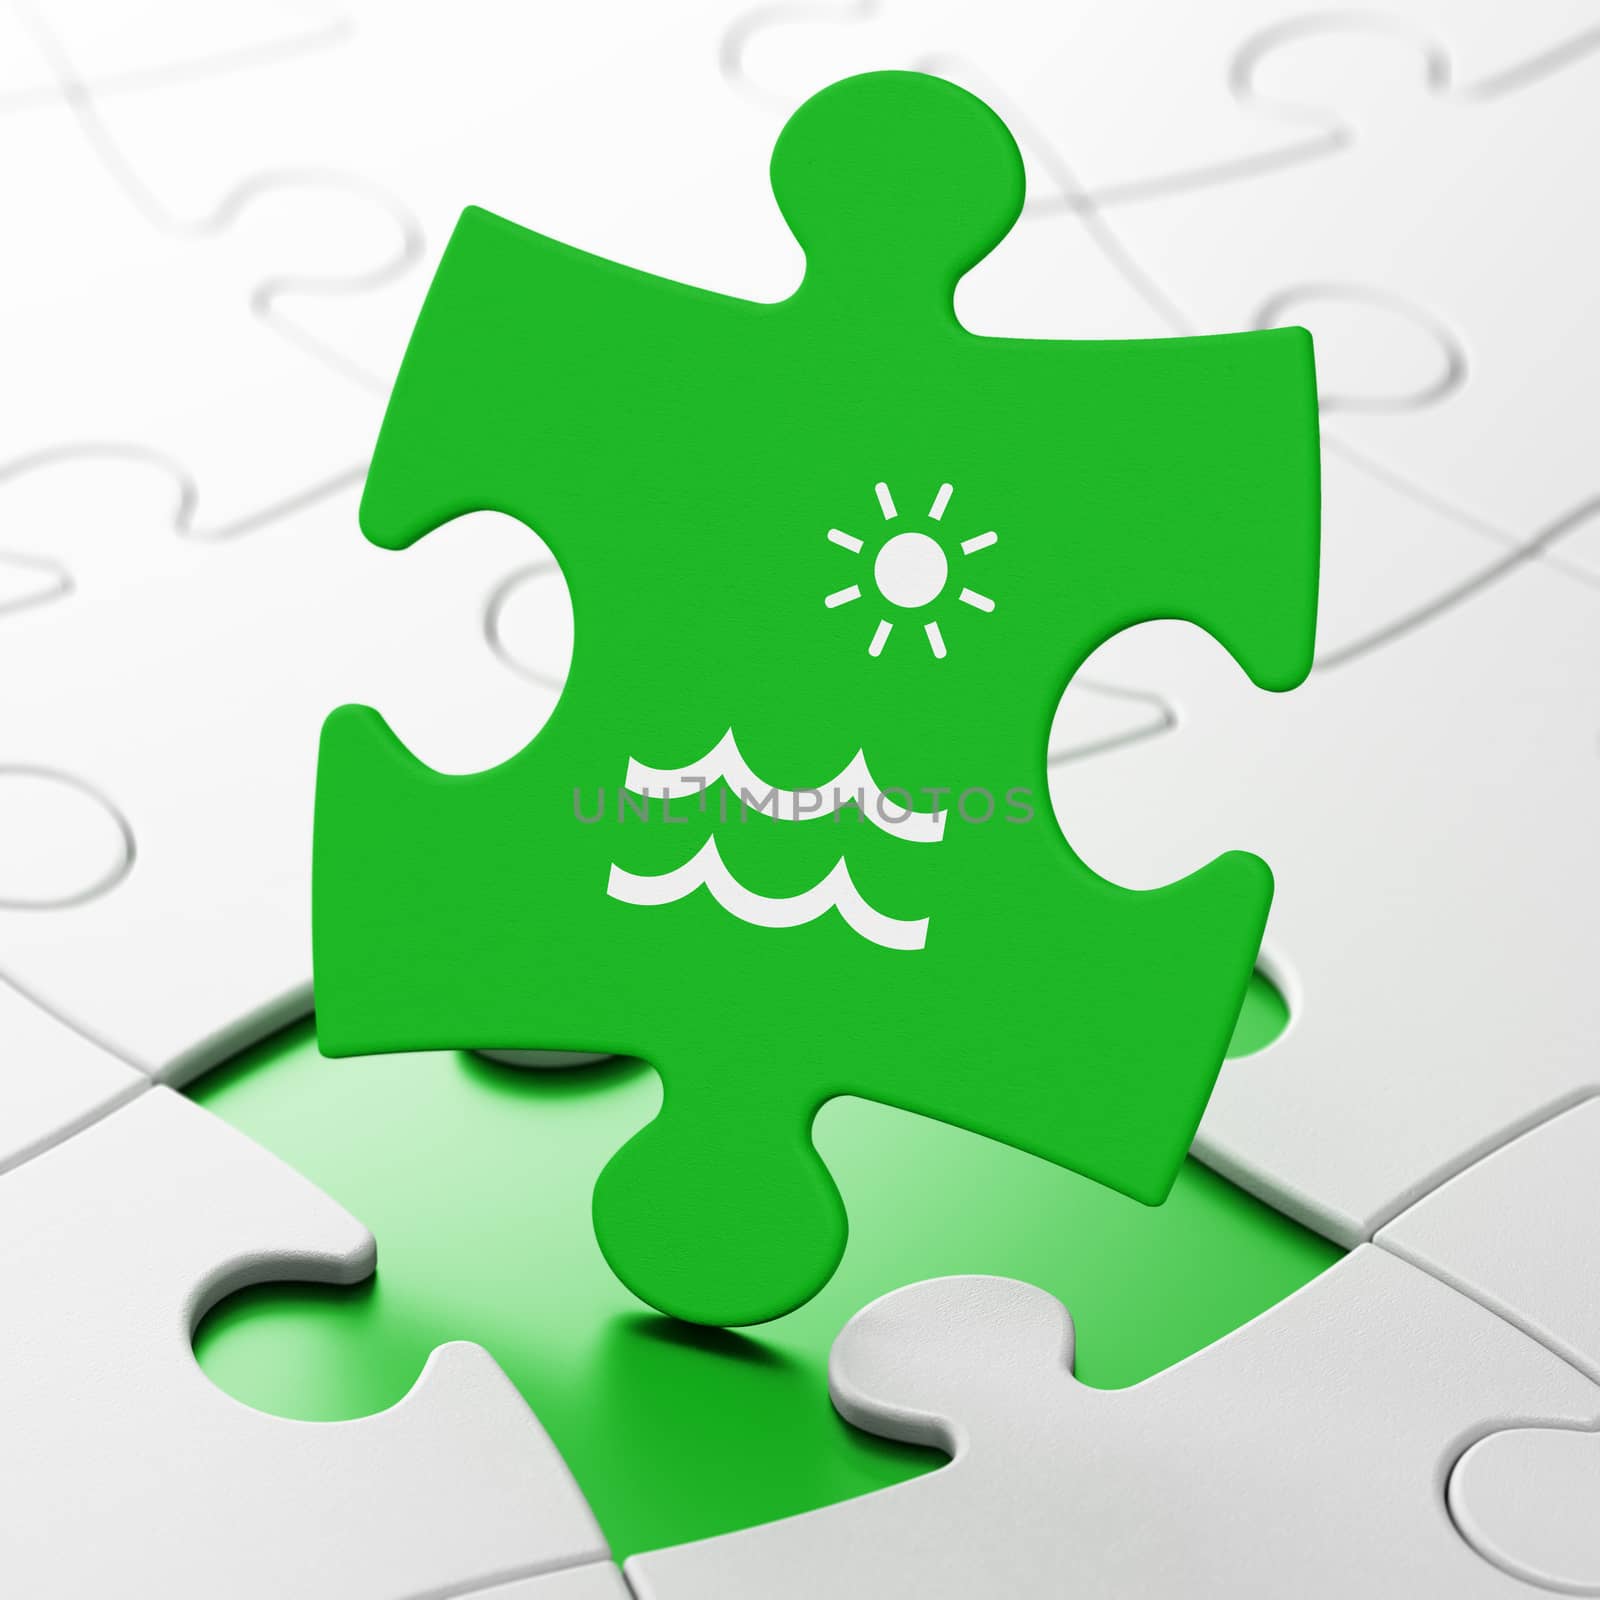 Vacation concept: Beach on Green puzzle pieces background, 3D rendering